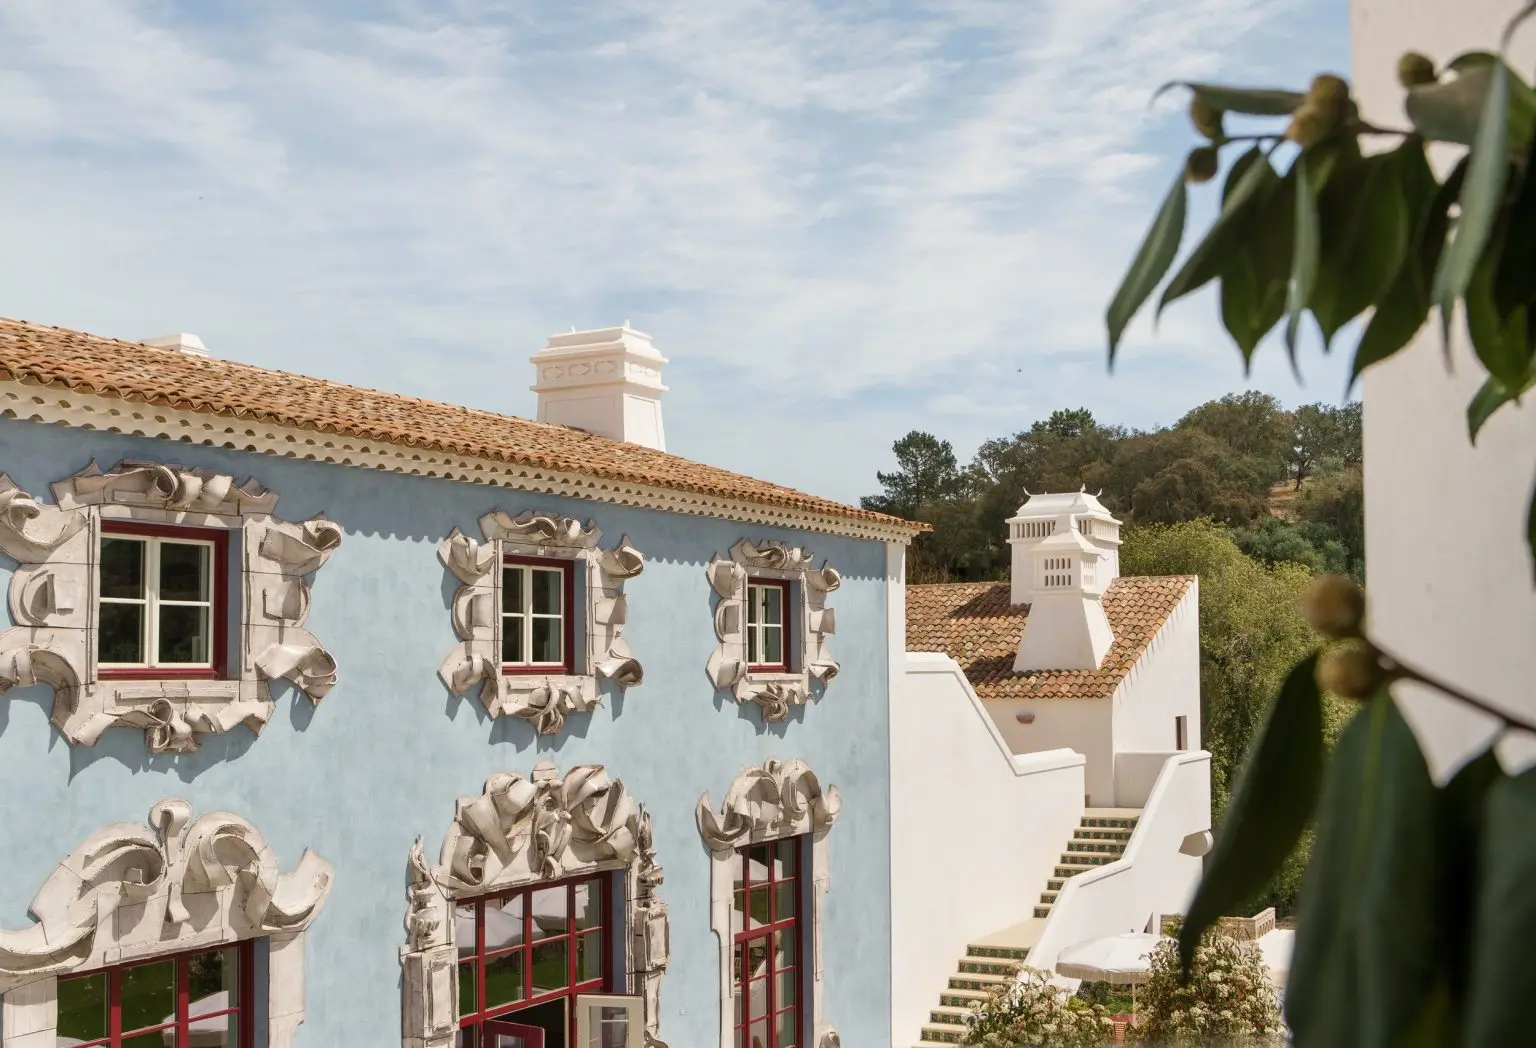 Inside Christian Louboutin's Portuguese Beach Compound - The New